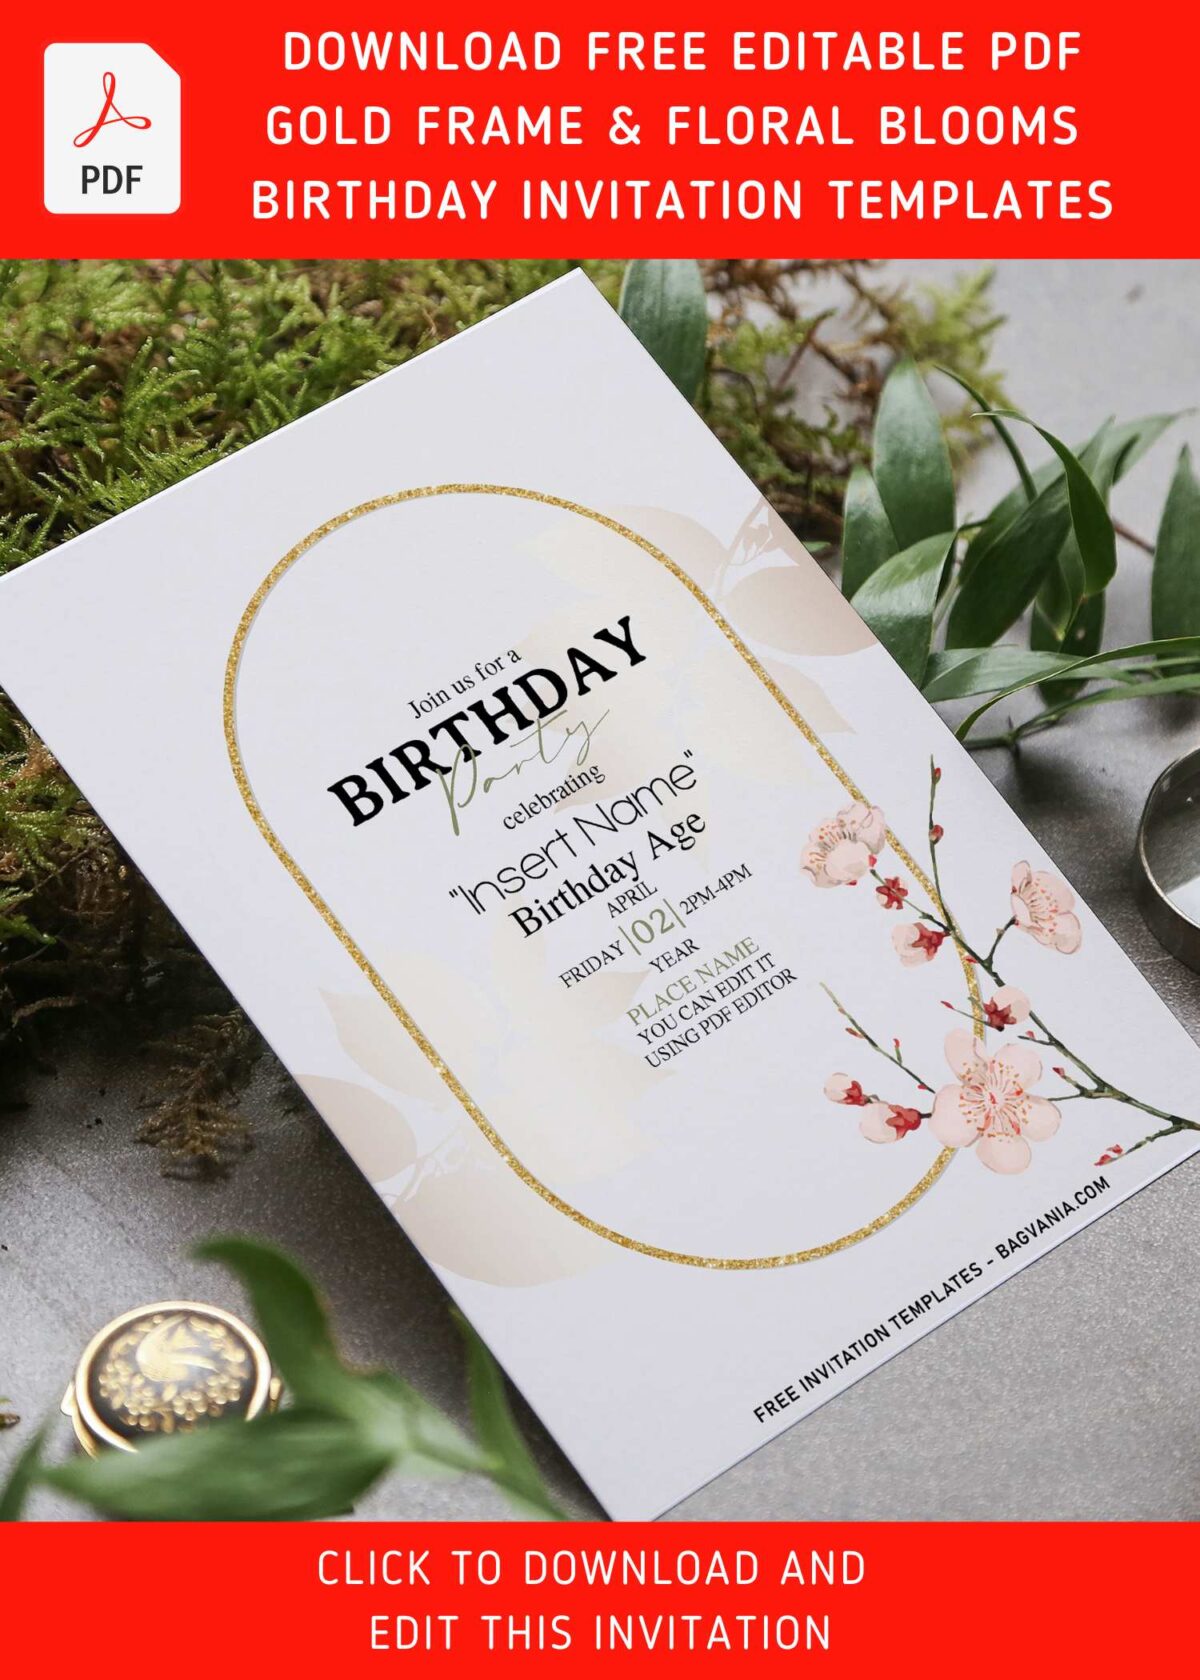 (Free Editable PDF) Gold Frame And Floral Blooms Invitation Templates with beautiful white cosmos